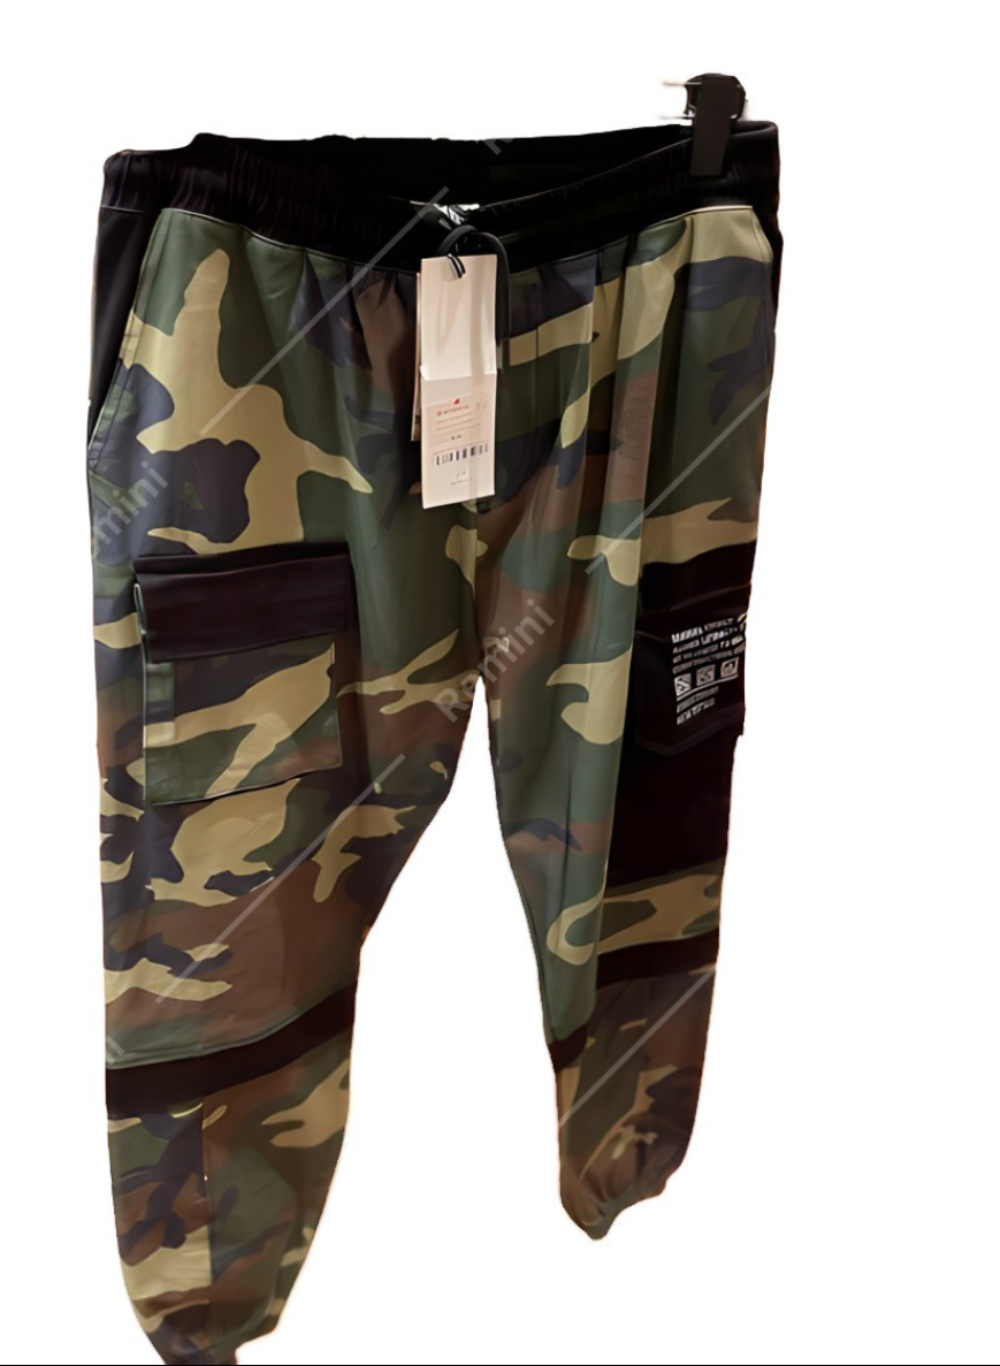 Men's Sweatpant Cameoflage with Side Pockets